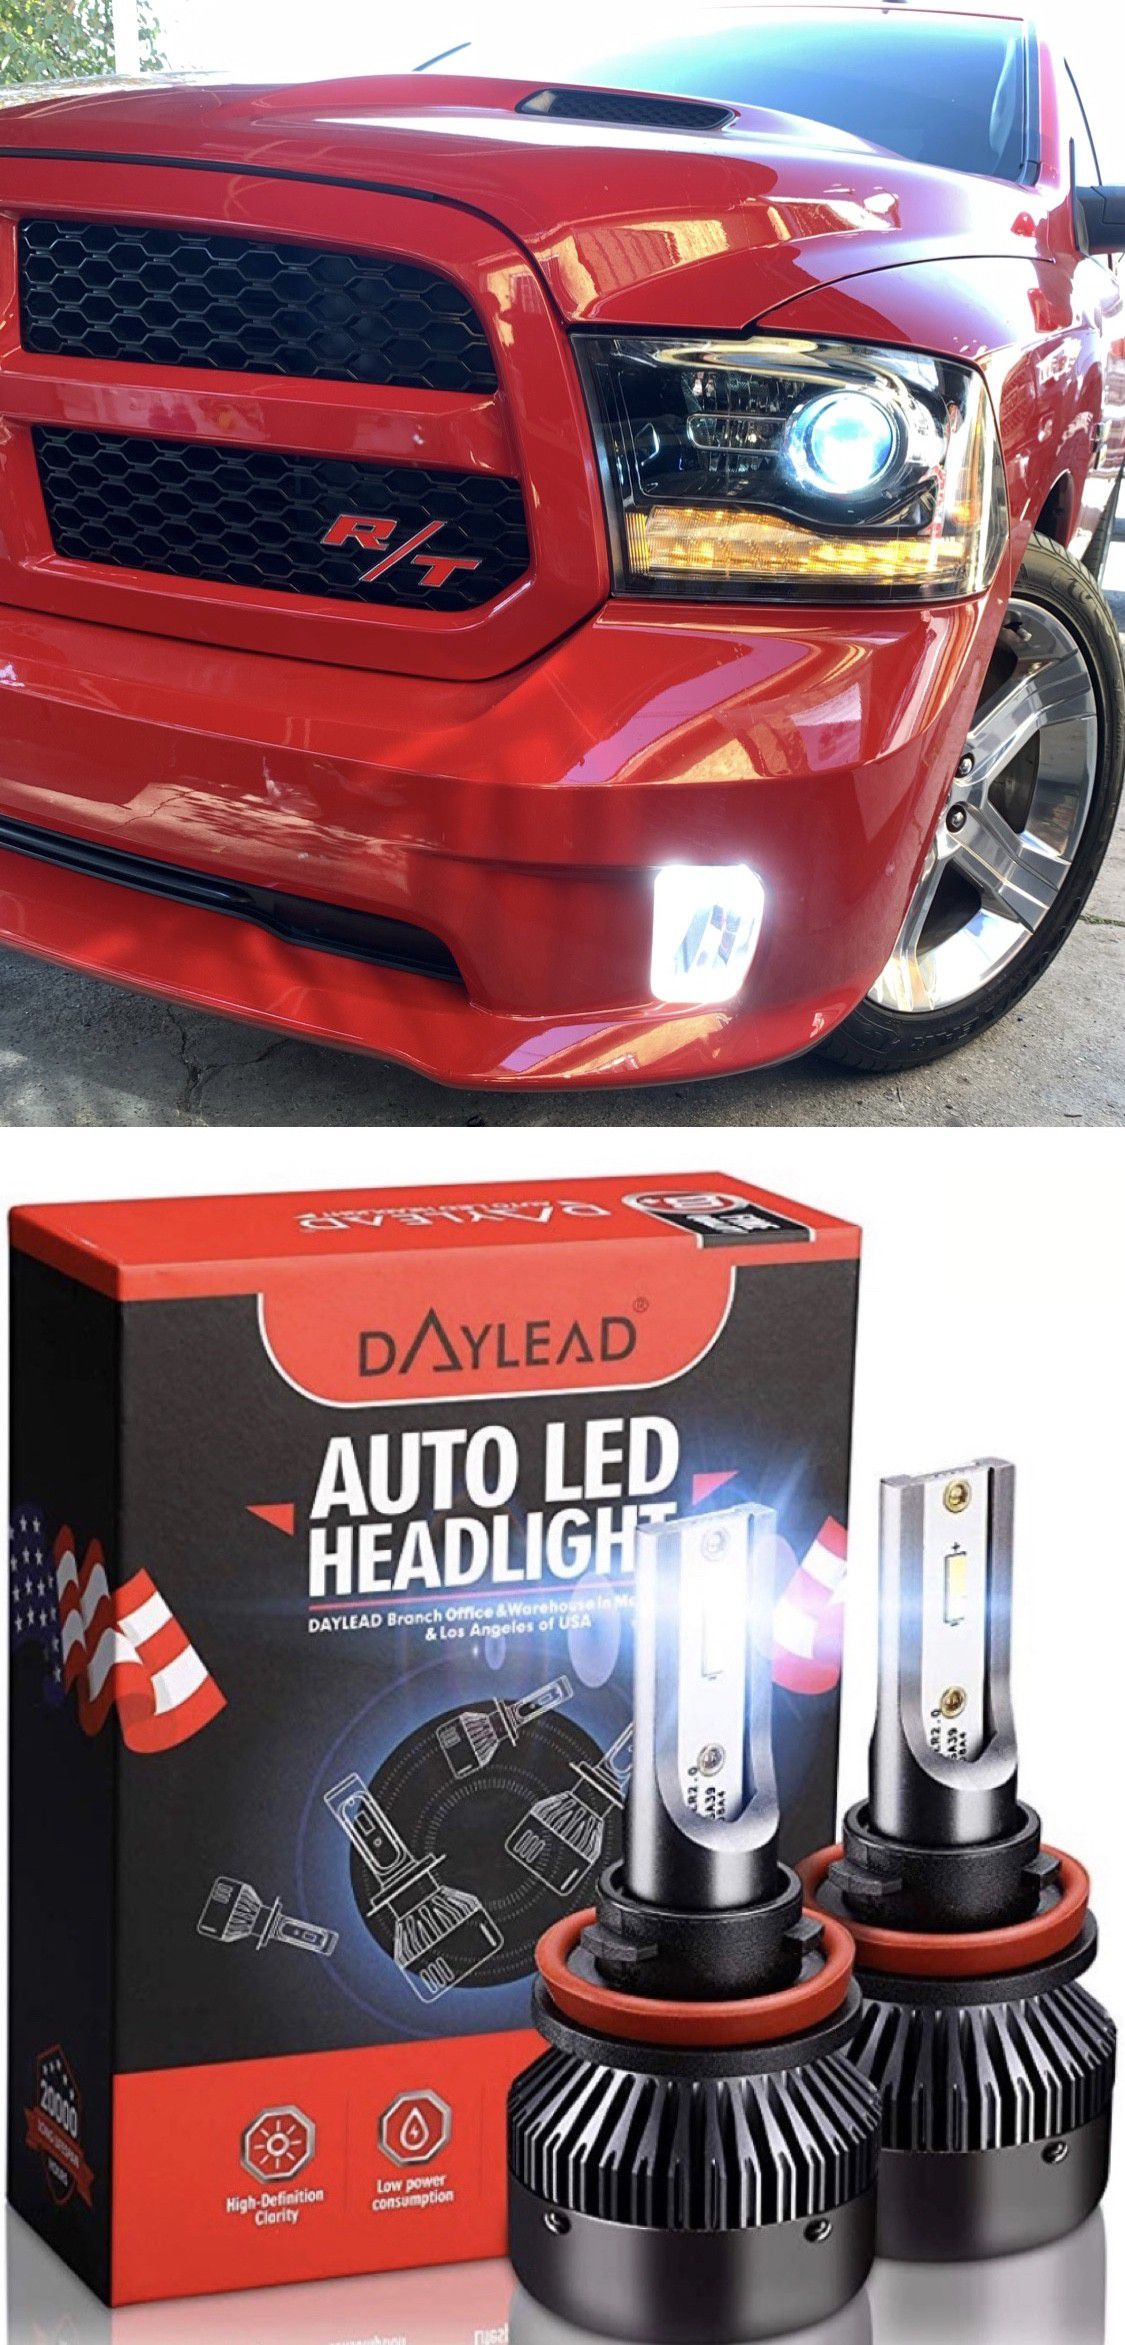 Daylead USA led headlights top quality 25$ warranty plug and play free license plate LEDs with purchase